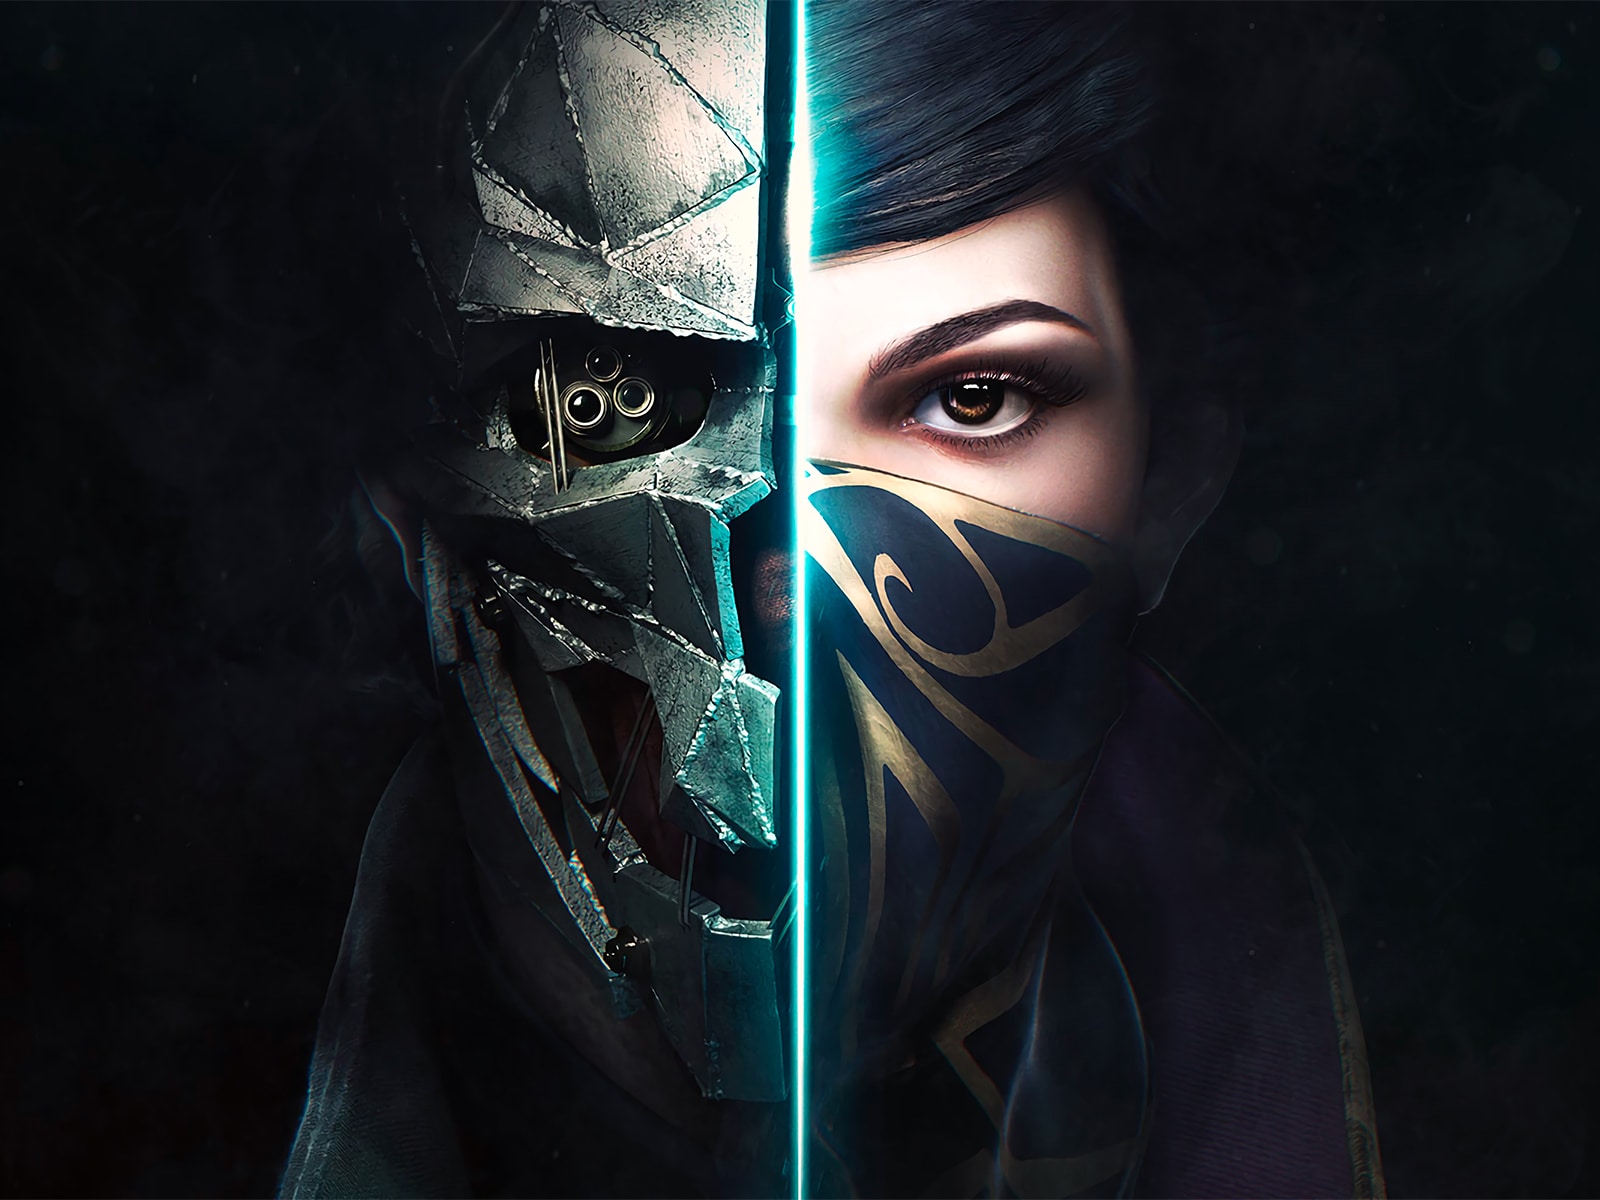 dishonored trainer on cheats happens